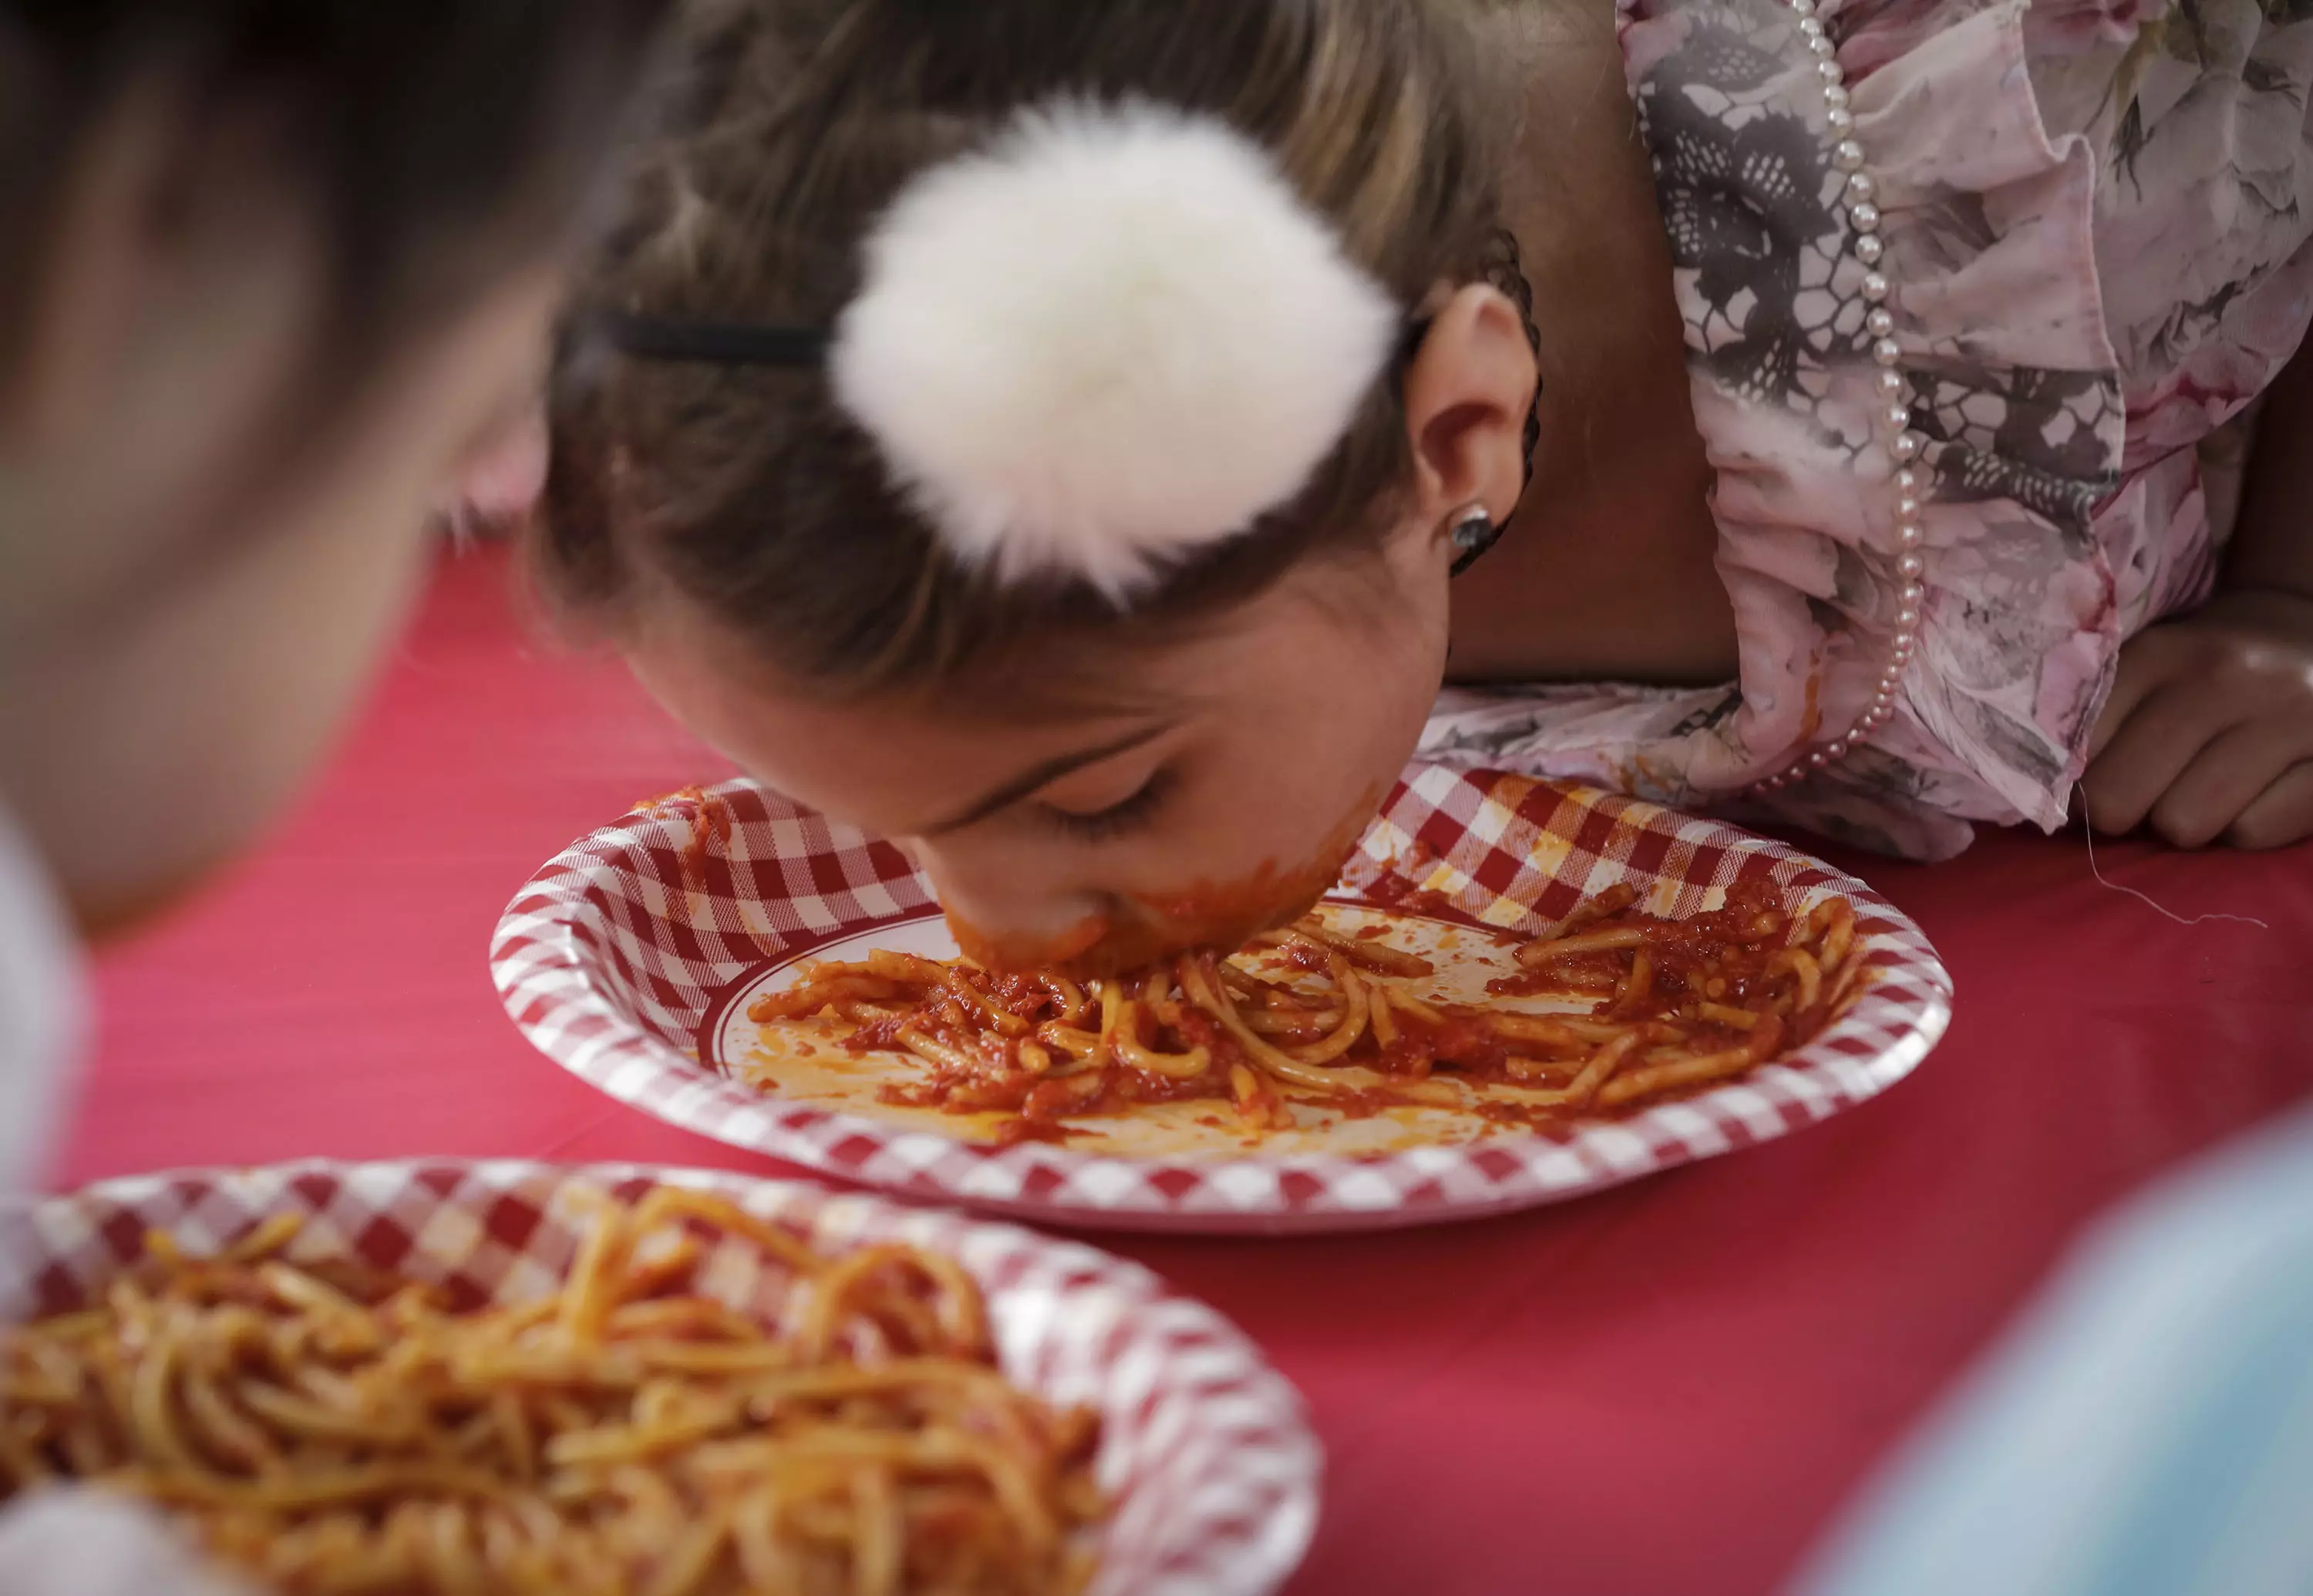 If you like eating pasta without your hands, you should like this festival.